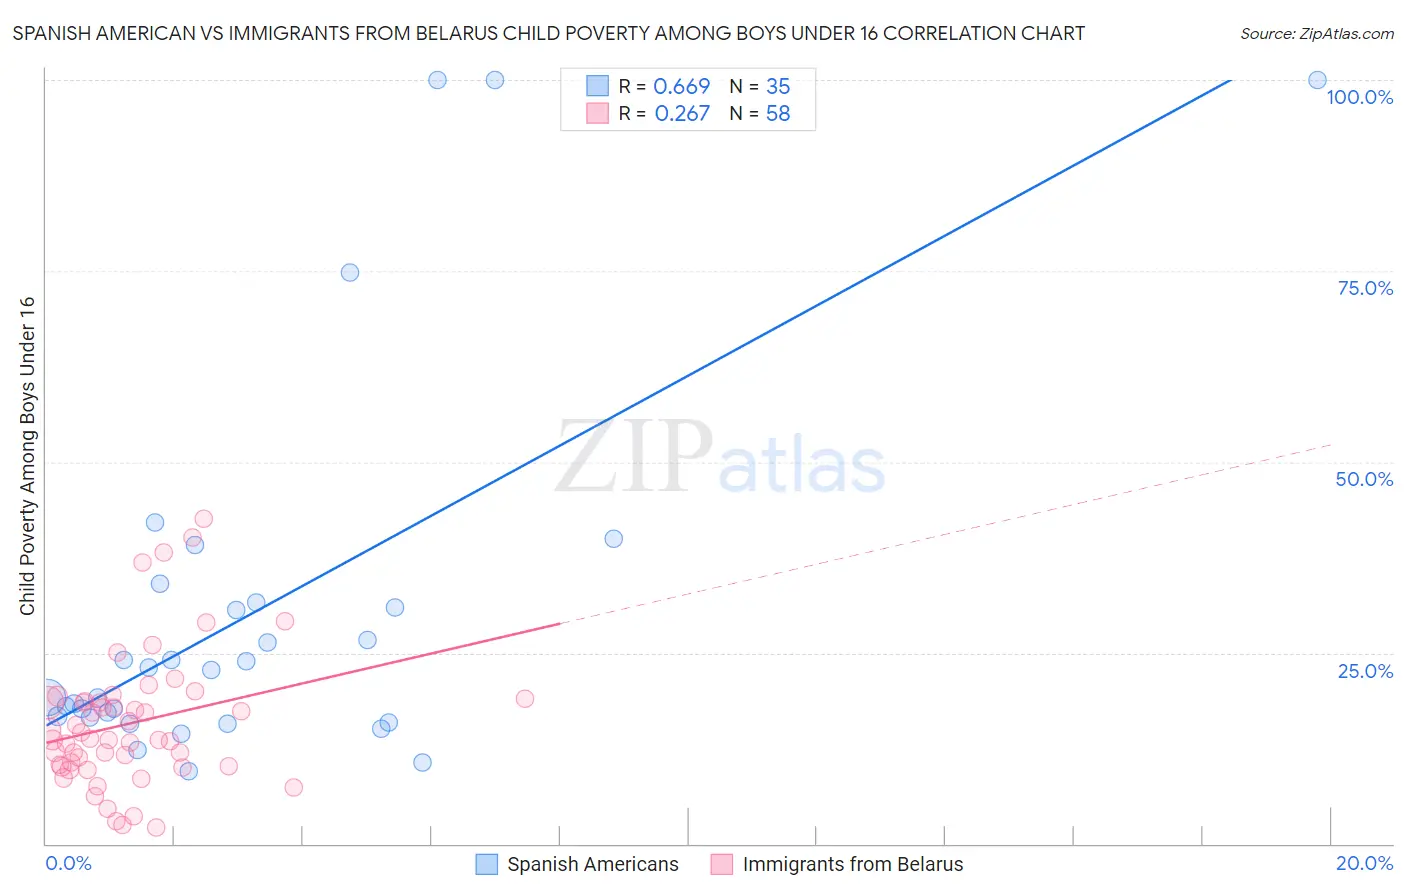 Spanish American vs Immigrants from Belarus Child Poverty Among Boys Under 16